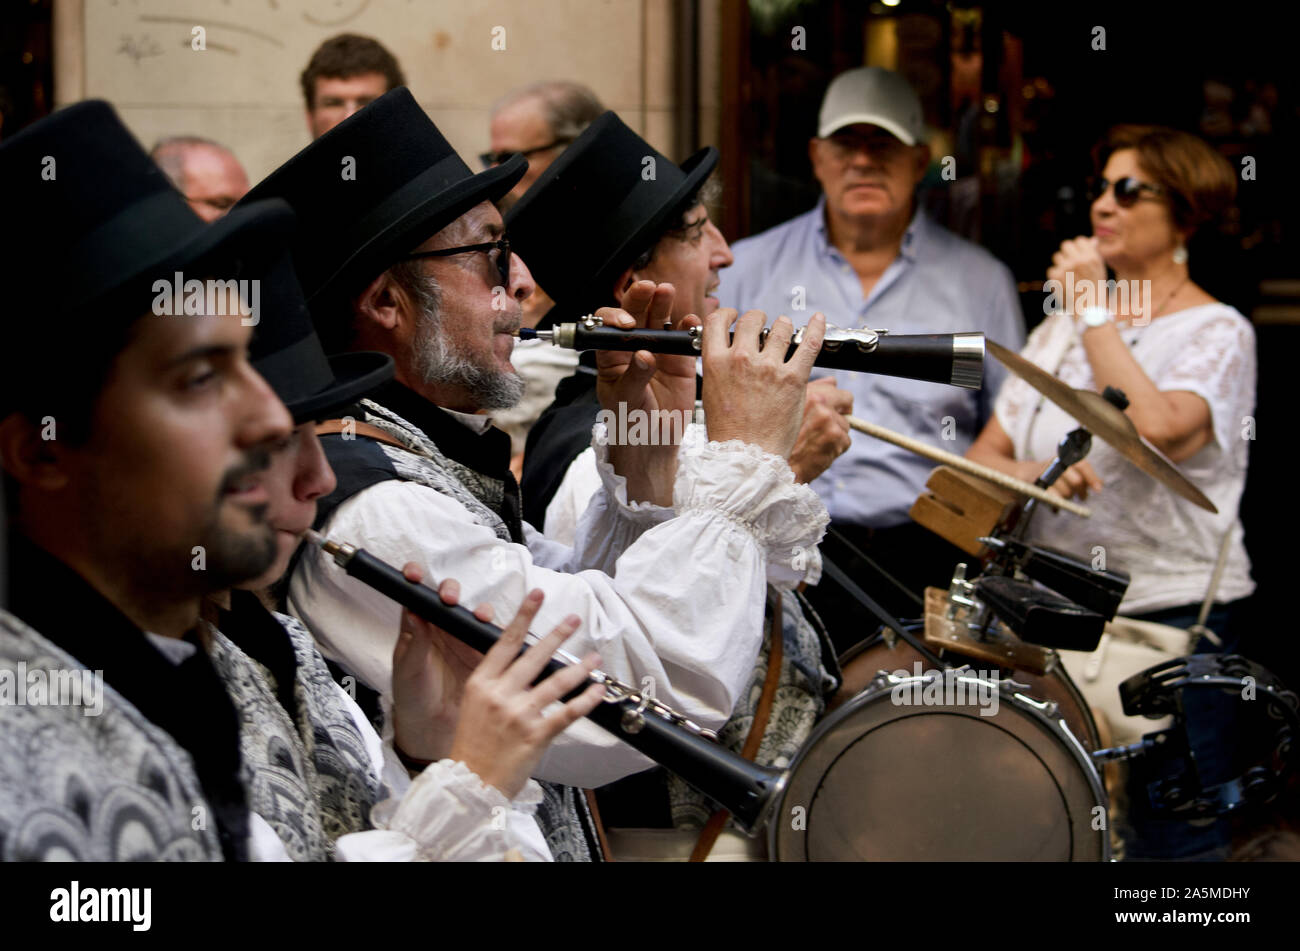 Men playing instruments at the Giants Parade during La Merce Festival 2019 at Placa de Sant Jaume in Barcelona, Spain Stock Photo